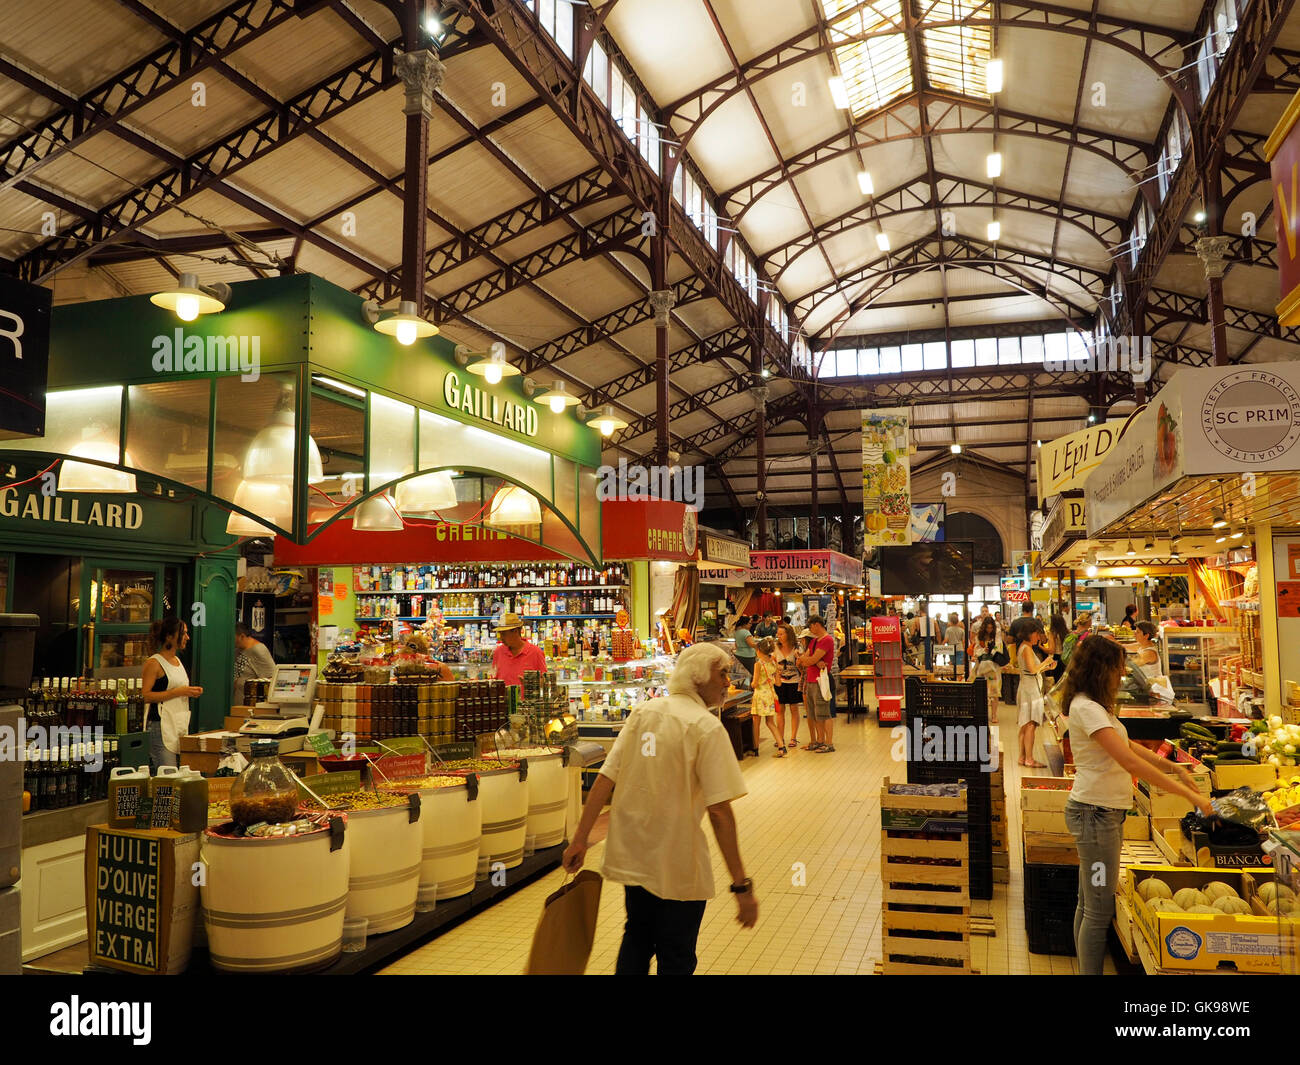 Inside les halles the food market halls in the city center of Narbonne, Languedoc Roussillon, southern France Stock Photo